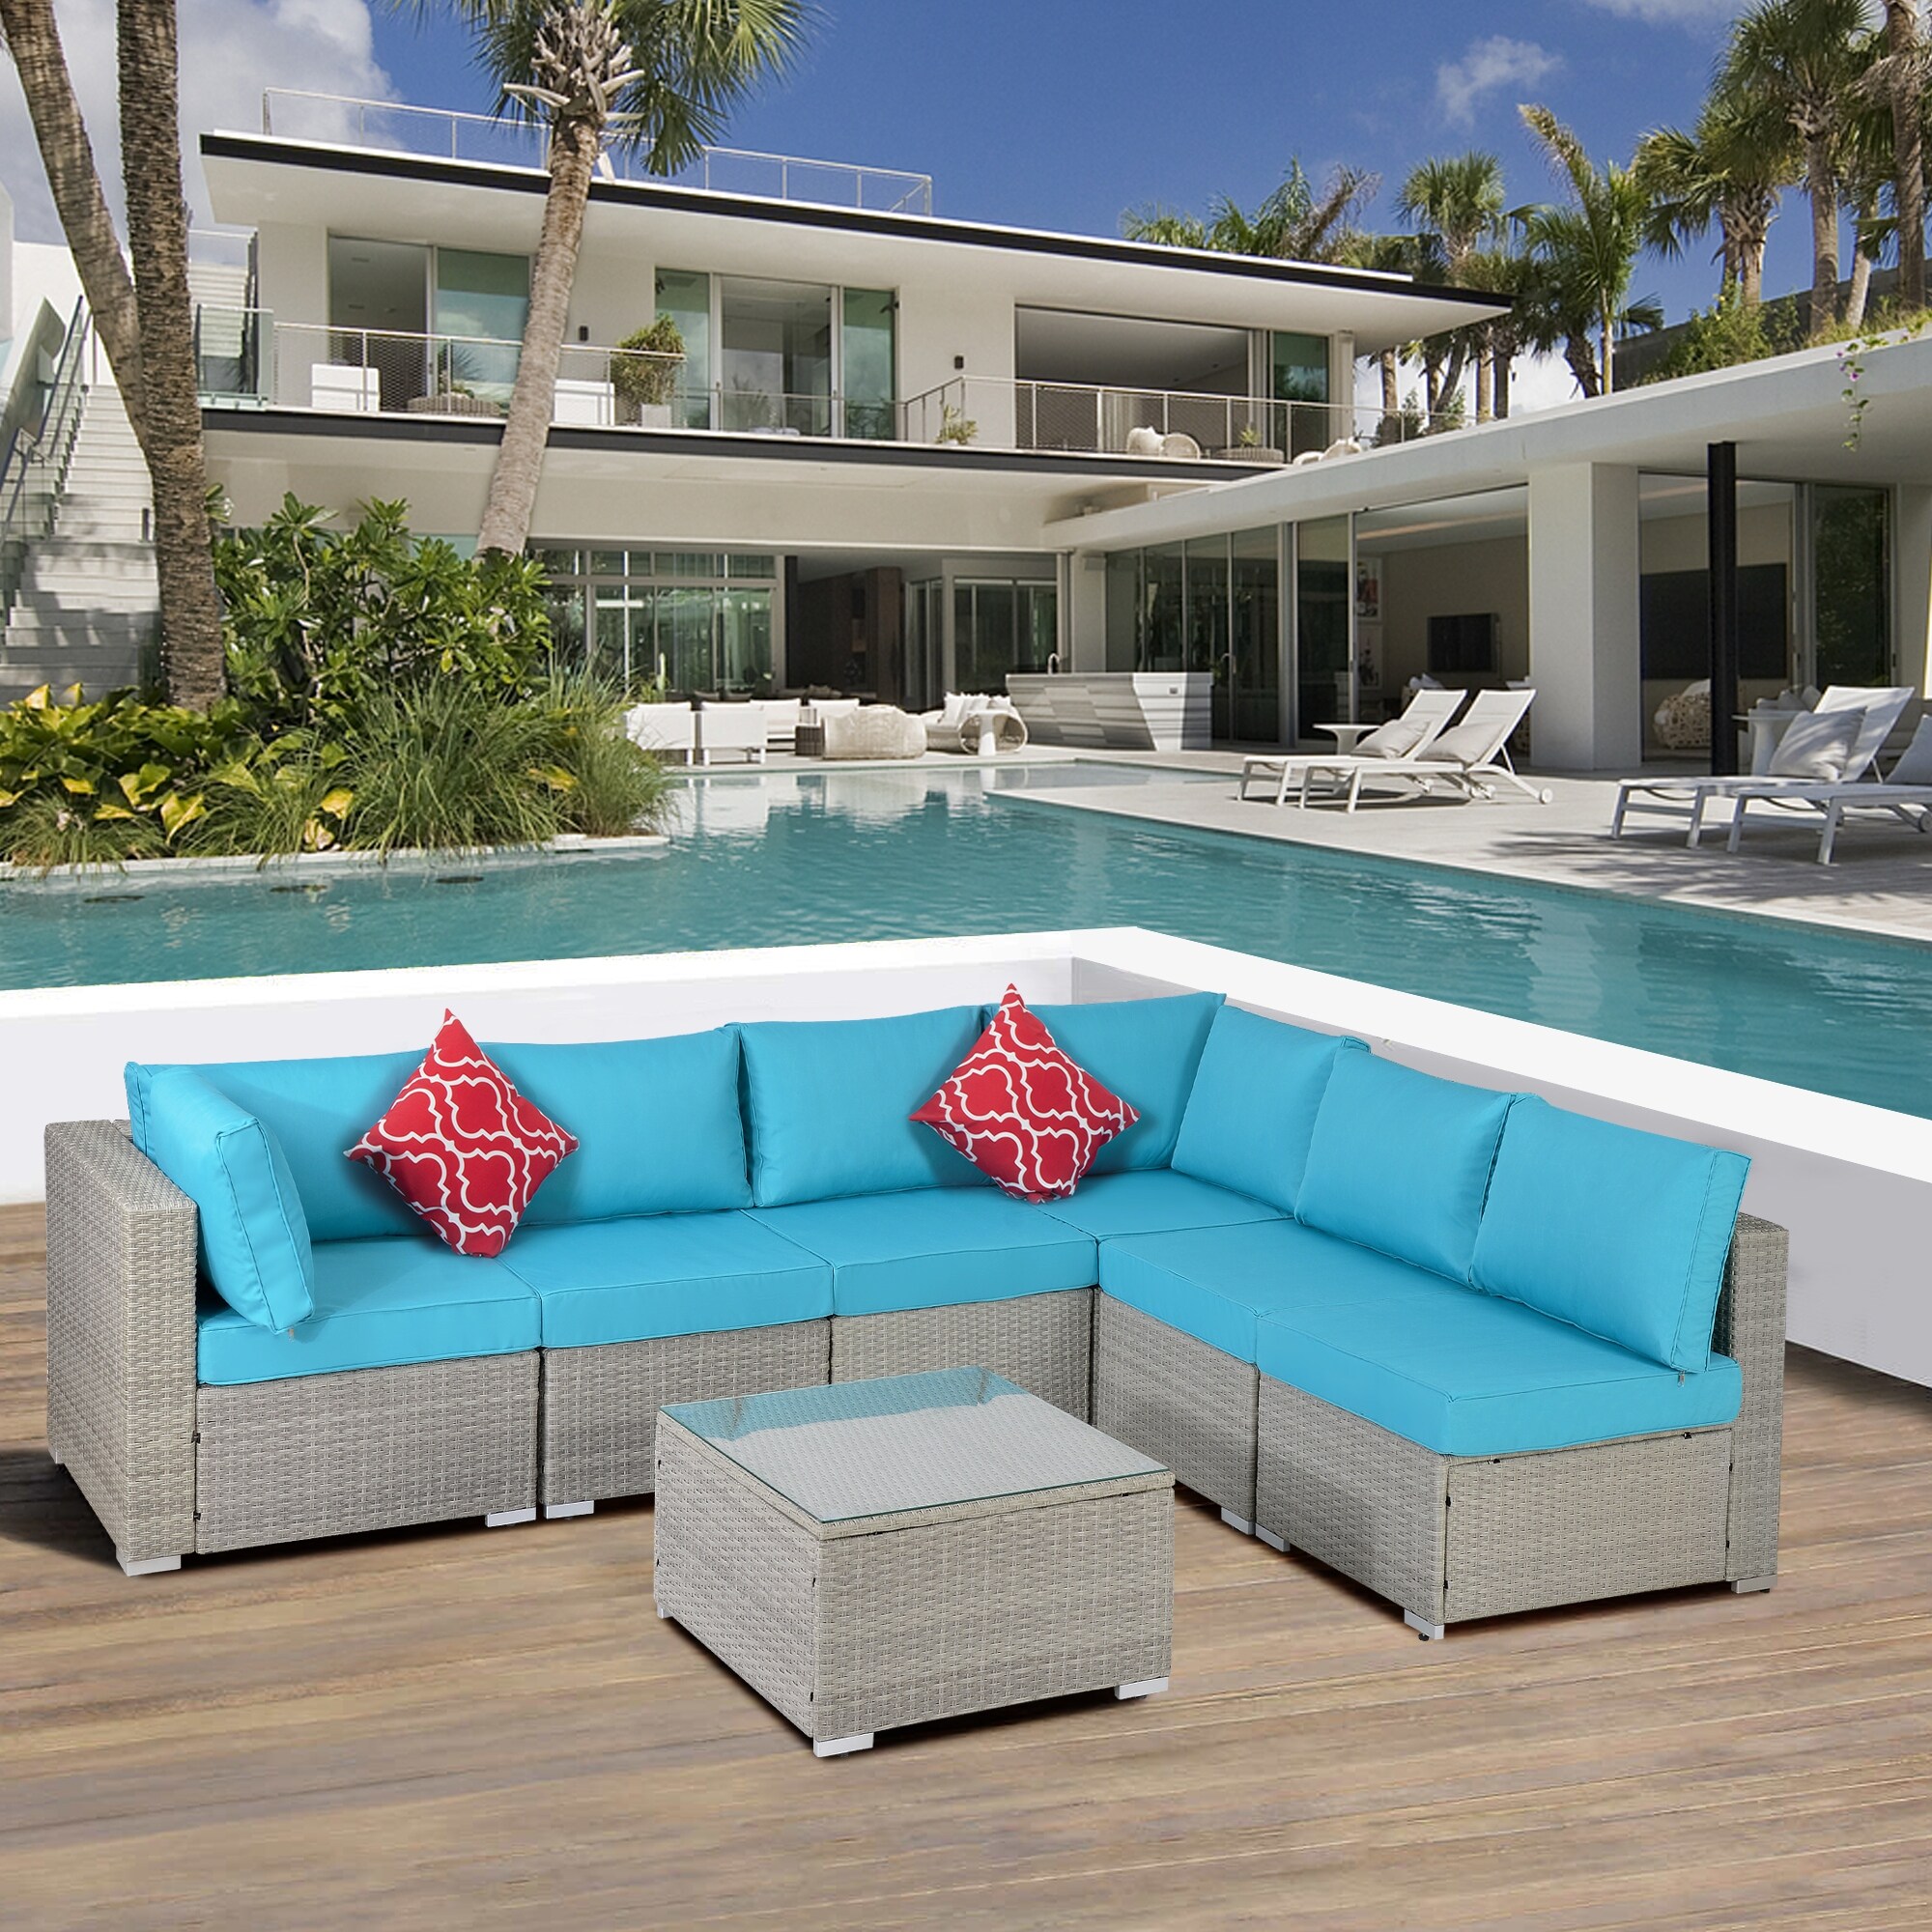 Outdoor 7-piece Sofa Set For You To Enjoy Outdoor Time With Your Family Or Friends. Create A Relaxing Atmosphere